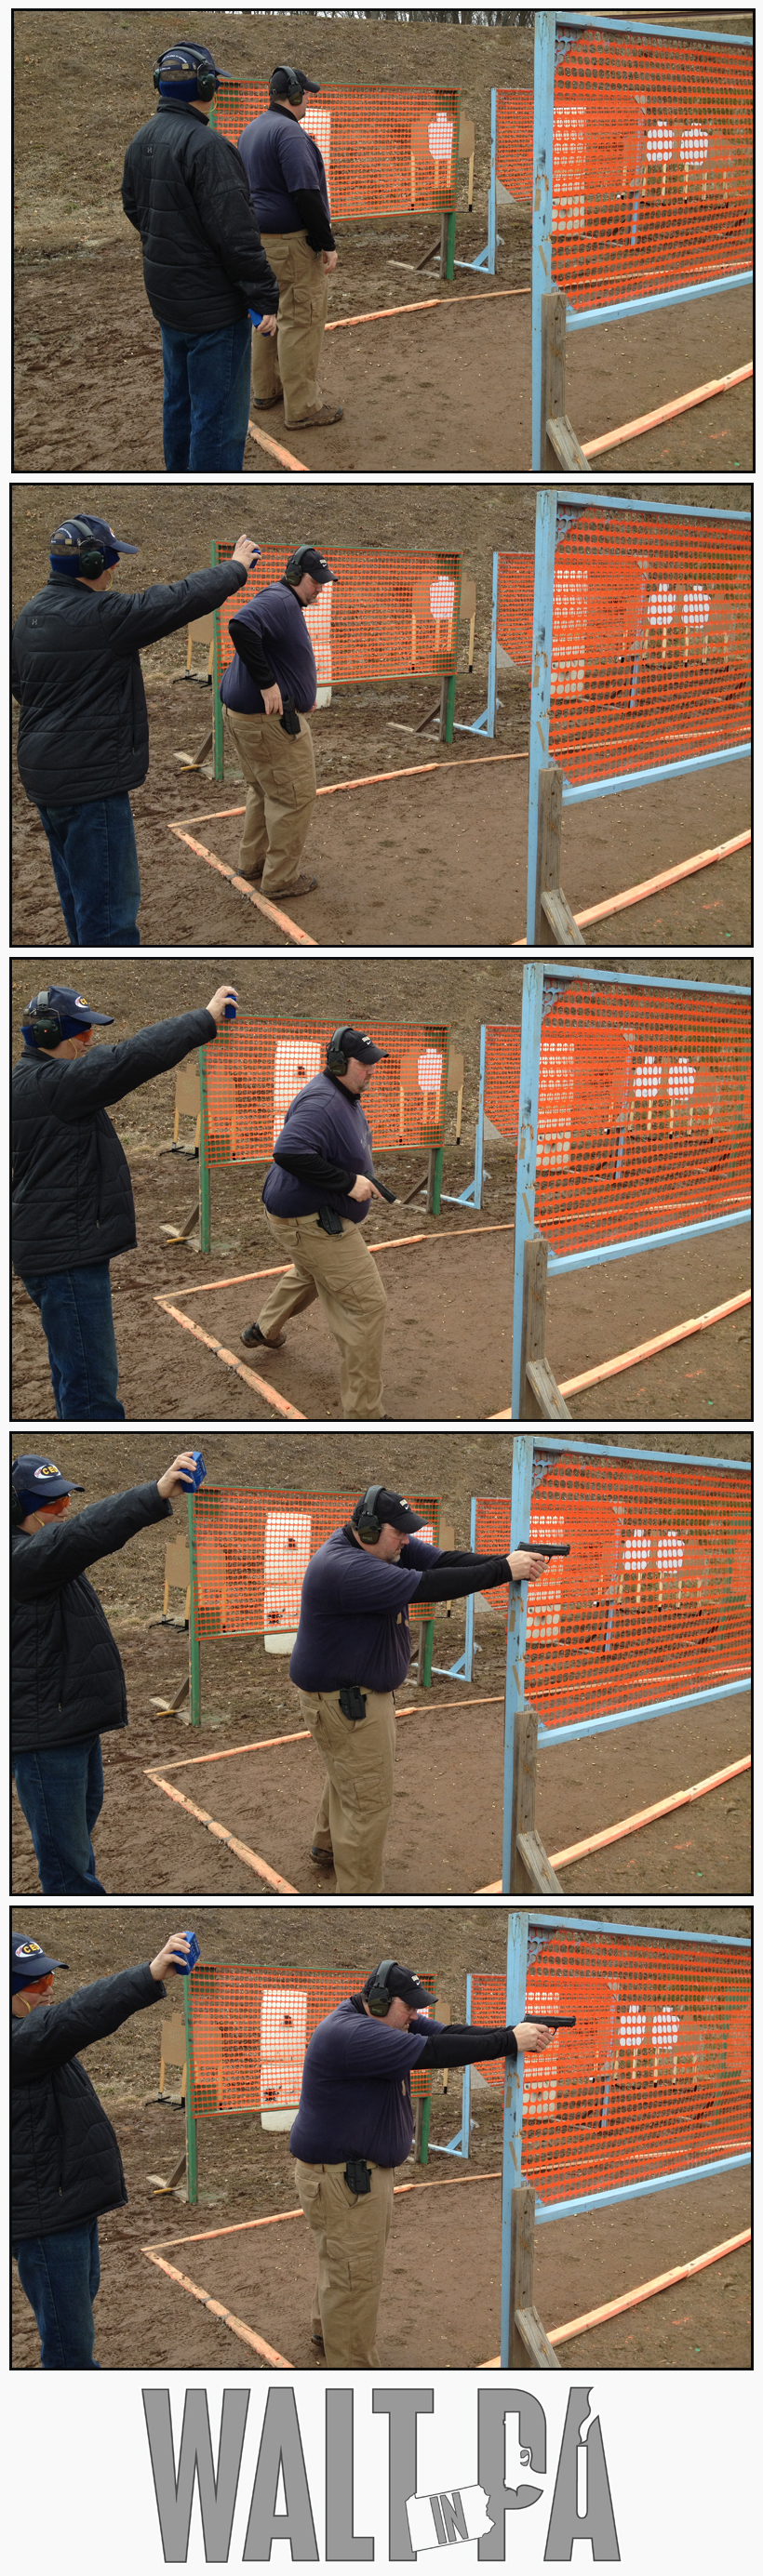 USPSA Shooters in Motion - Kerry Woods